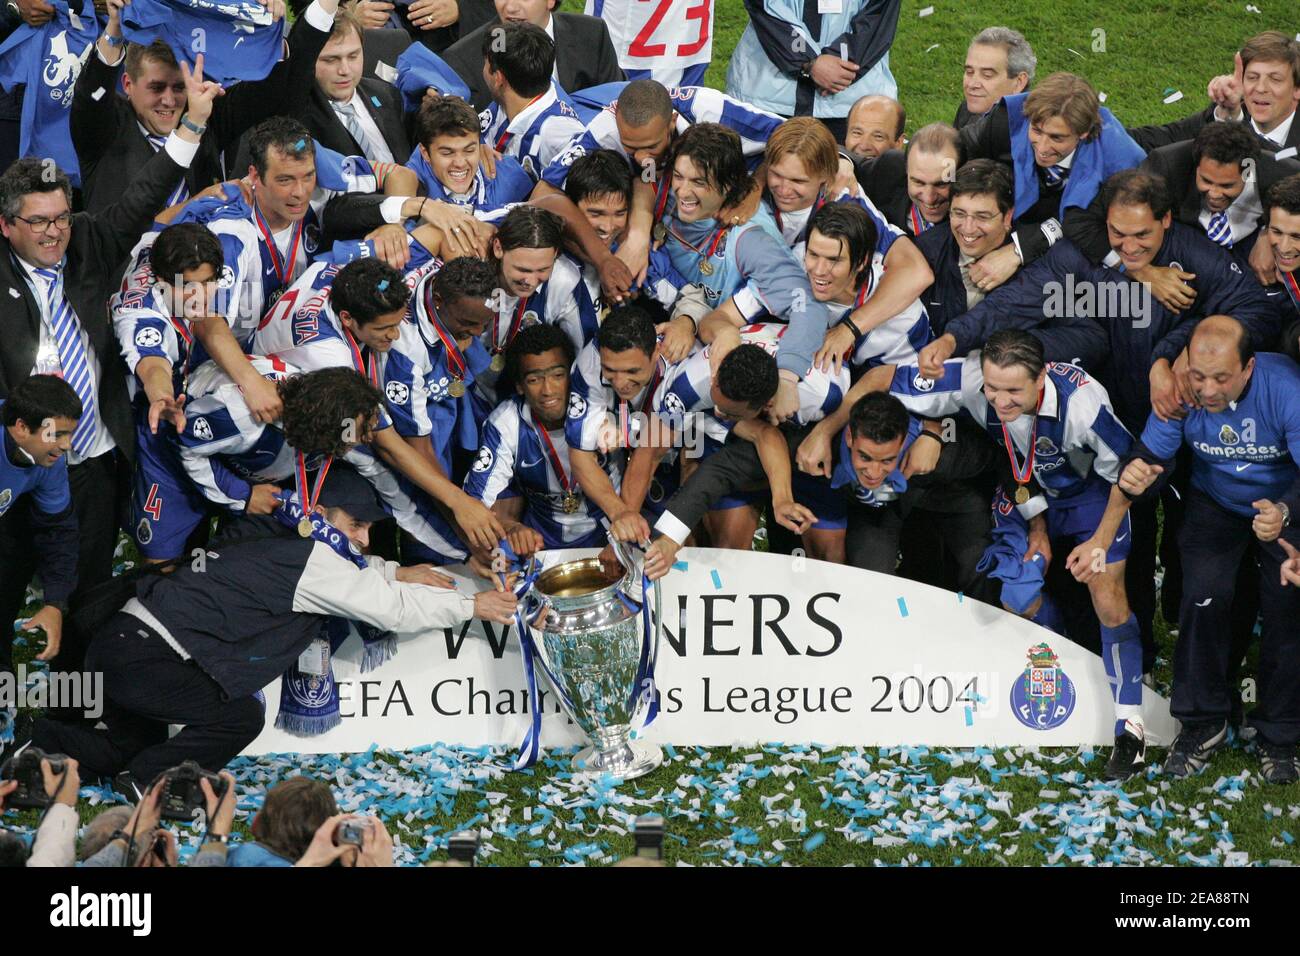 The FC Porto team pictured after their victory in the Champions League  final vs AS Monaco (0-3) in Gelsenkirchen-Germany on Wednedsday, May 26,  2004. Photo by Nebinger-Zabulon/ABACA Stock Photo - Alamy